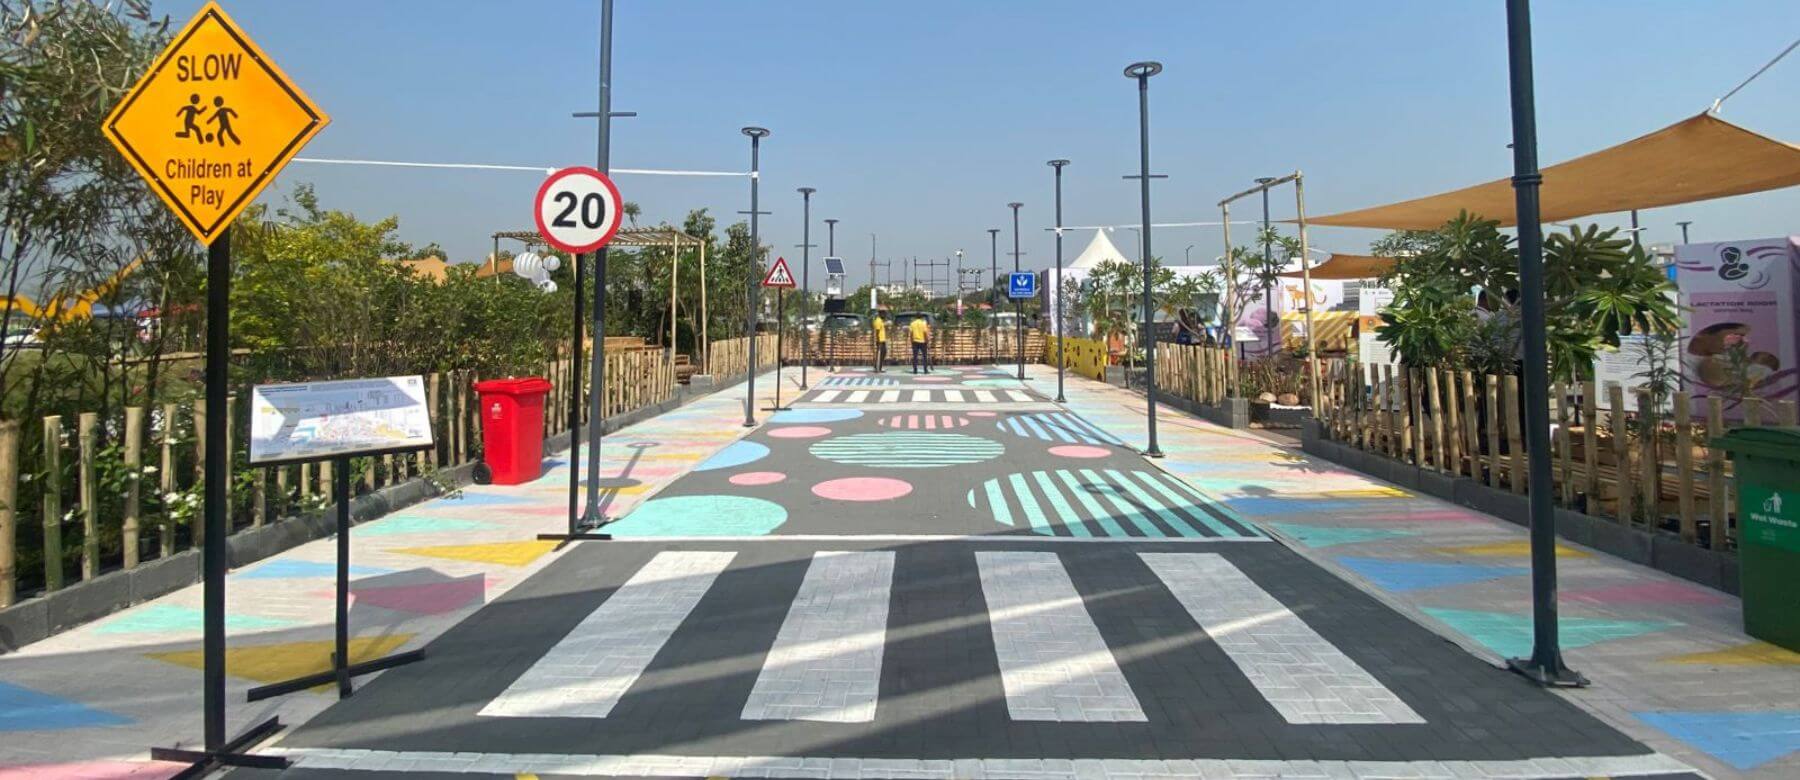 model street created at the Smart Cities Smart Urbanization 2022 conference incorporating all safety measures such as signages, streetlights, traffic calming measures such as painted junctions, painted cycle and pedestrian tracks, and plantation buffers at the street edges